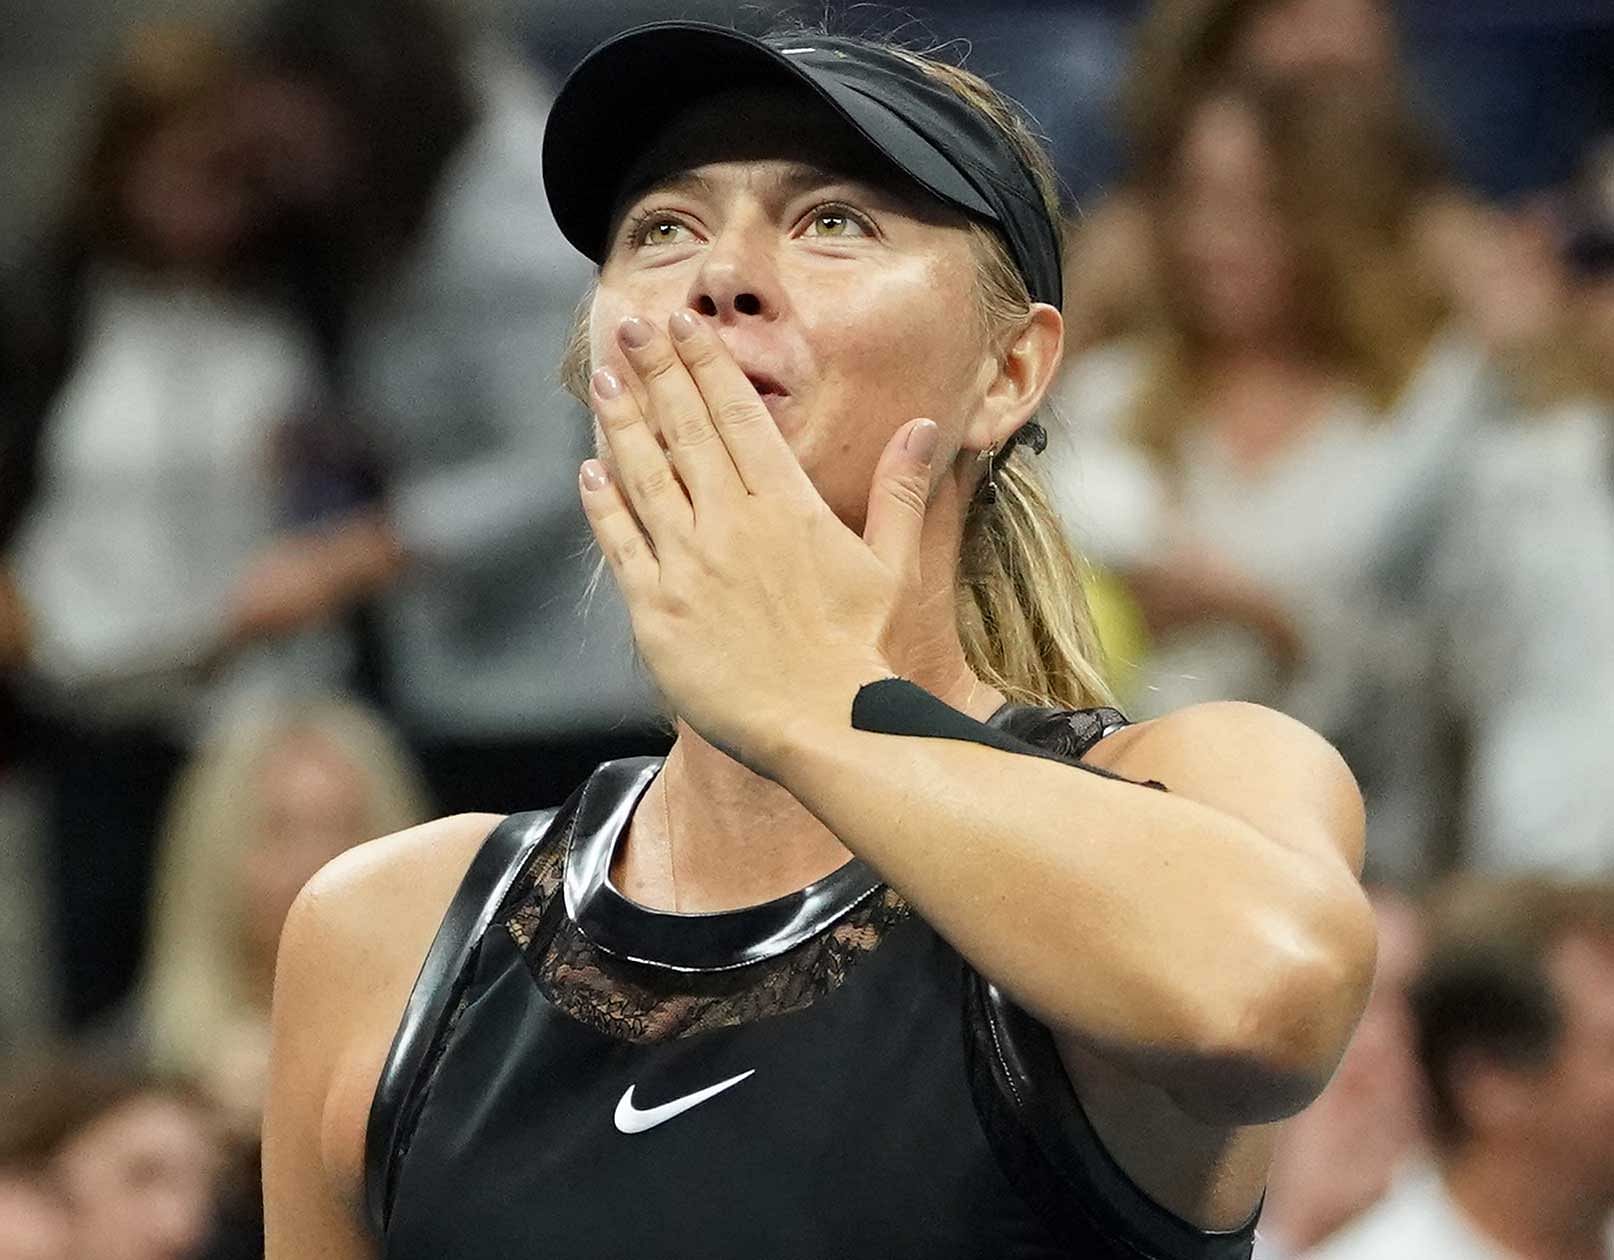 Former champion Maria Sharapova will not care less what reception she receives when she plays her first Australian Open match since completing a doping ban on Tuesday, according to three-times Melbourne winner Mats Wilander. Reuters file photo